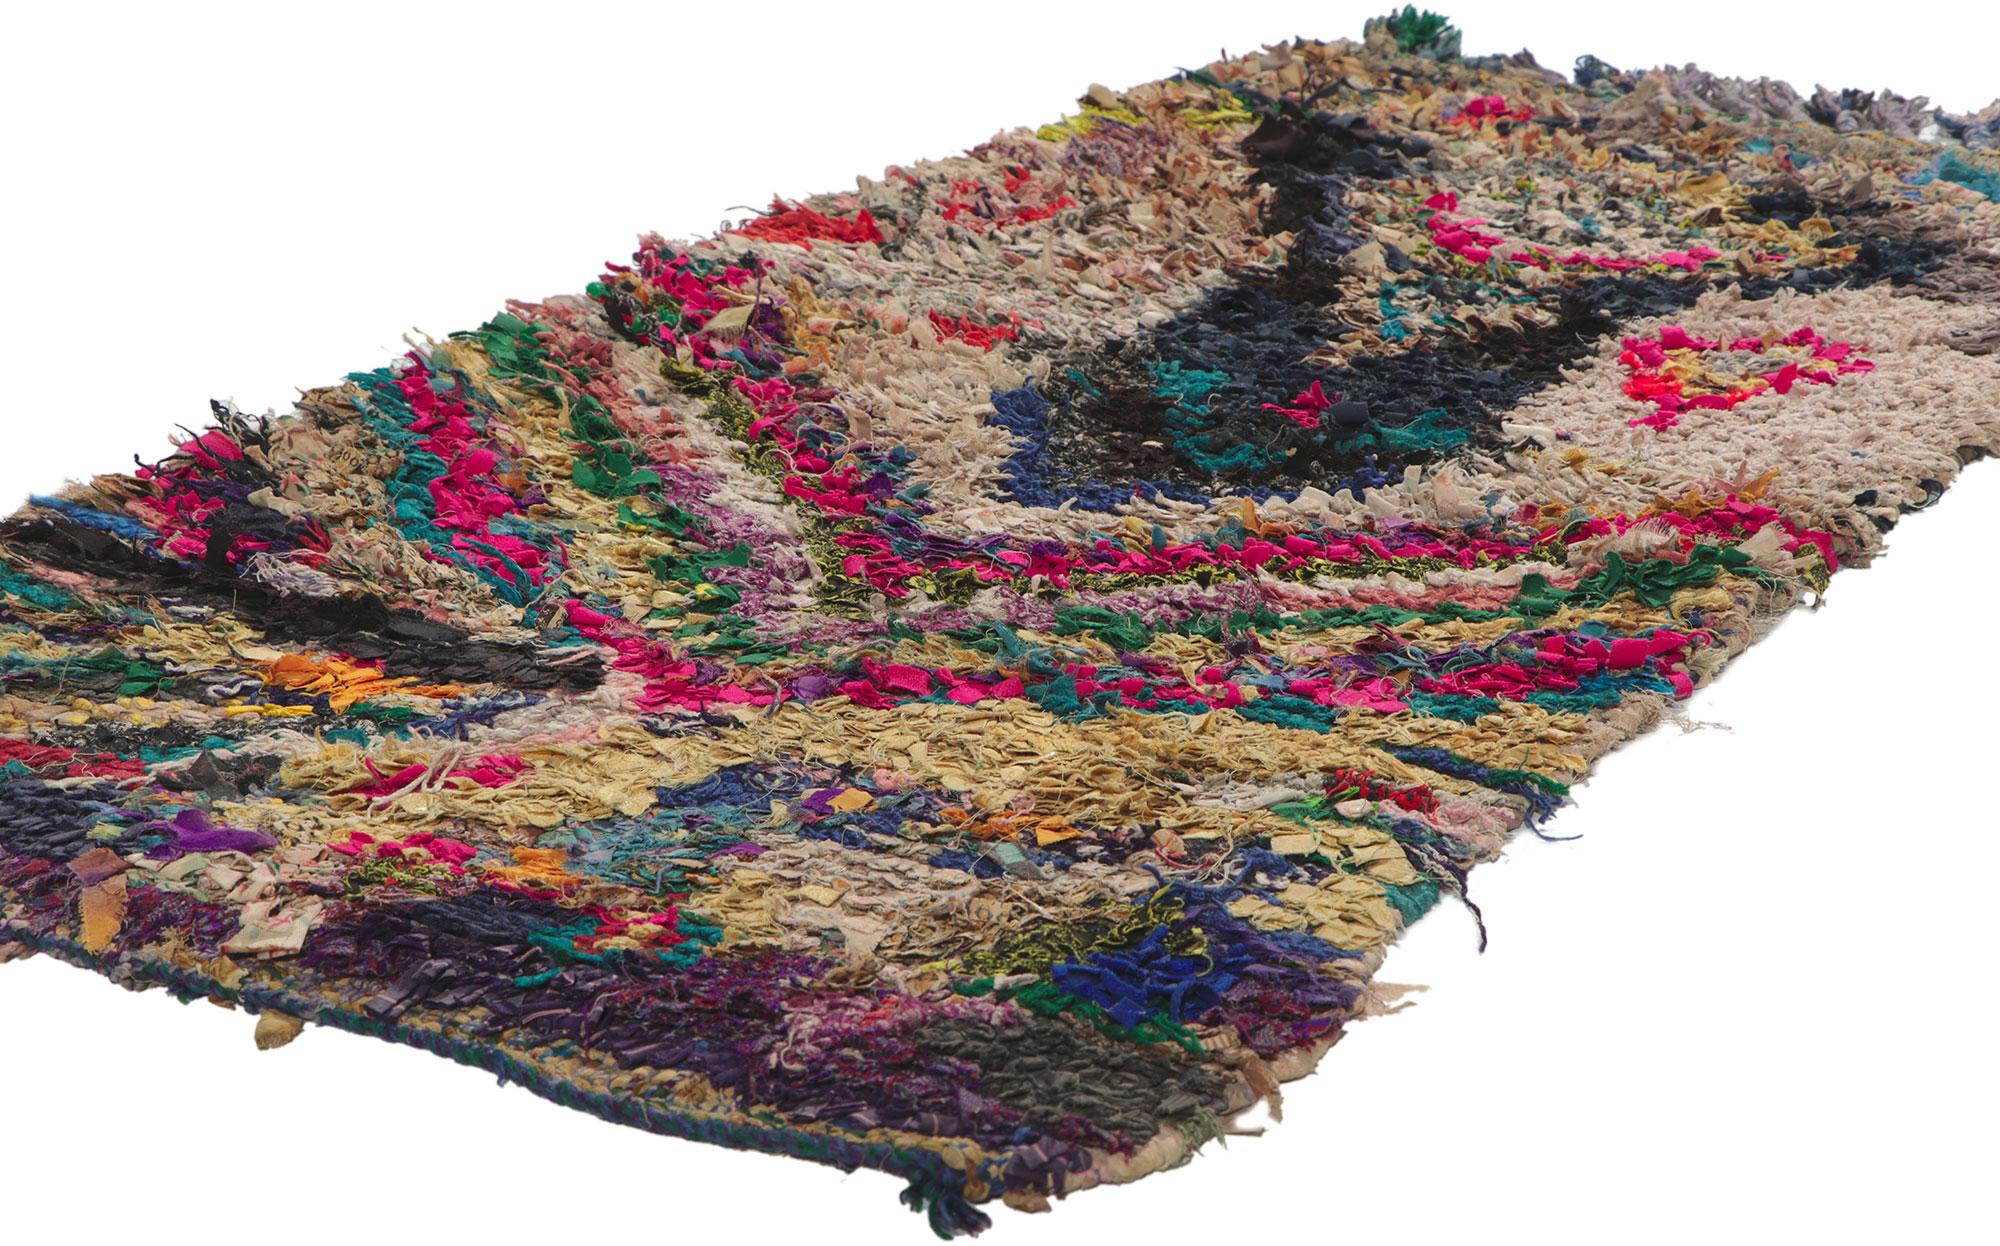 78408 Vintage Moroccan Rag rug, Berber Boucherouite 02'02 x 04'01. With its nomadic charm, incredible detail and texture, this hand knotted vintage Moroccan rag rug is a captivating vision of woven beauty. The eye-catching tribal design and lively